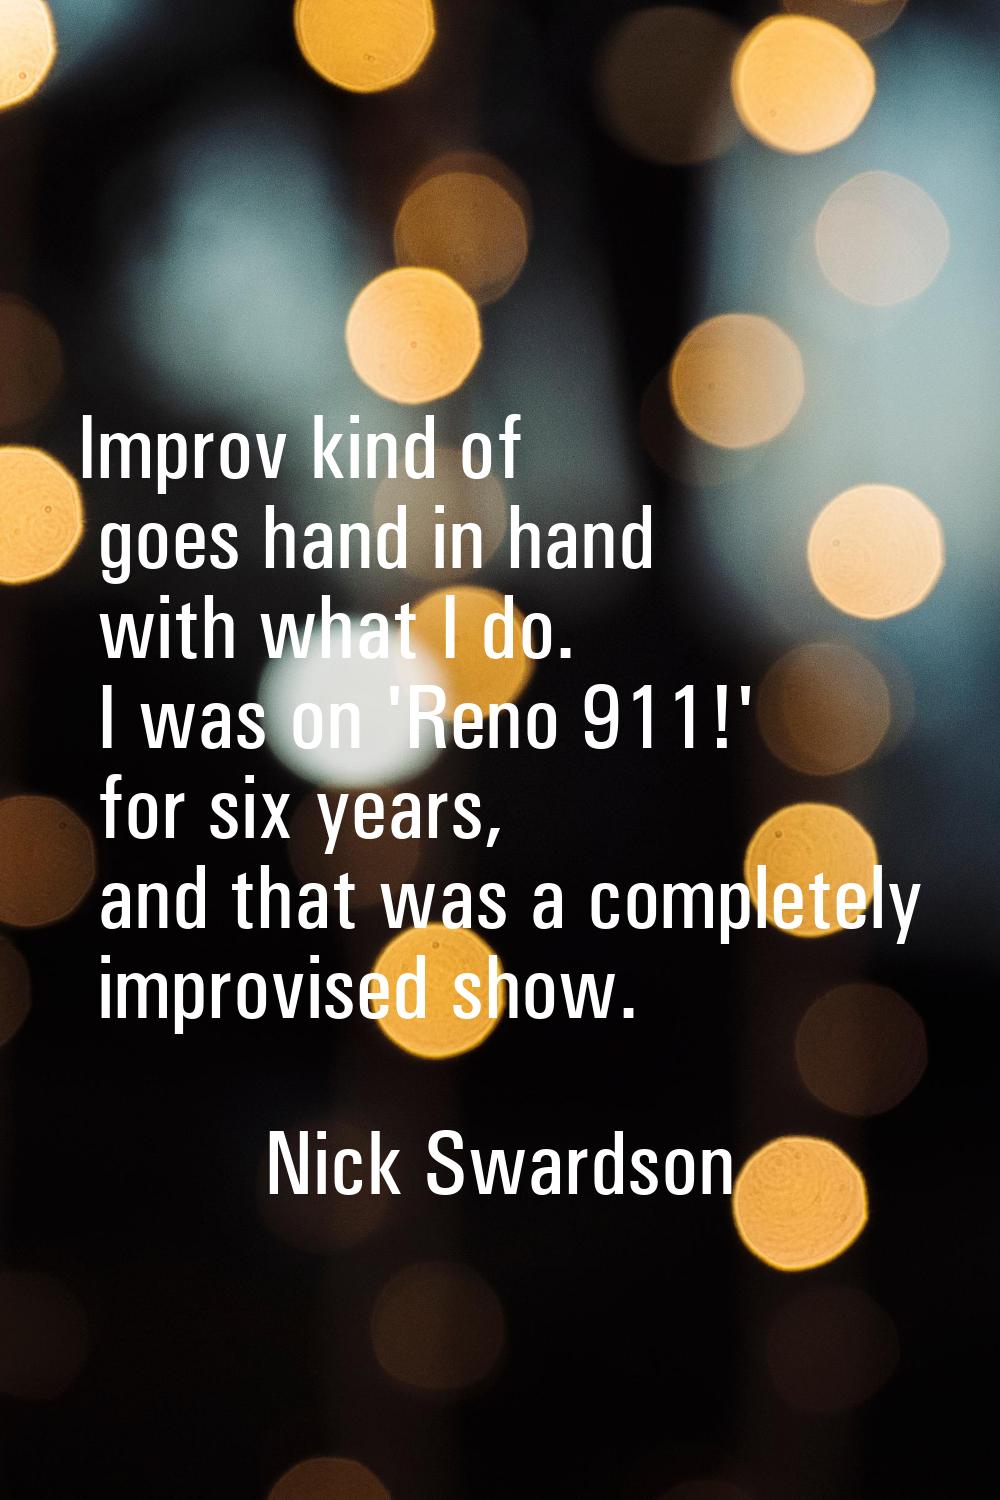 Improv kind of goes hand in hand with what I do. I was on 'Reno 911!' for six years, and that was a